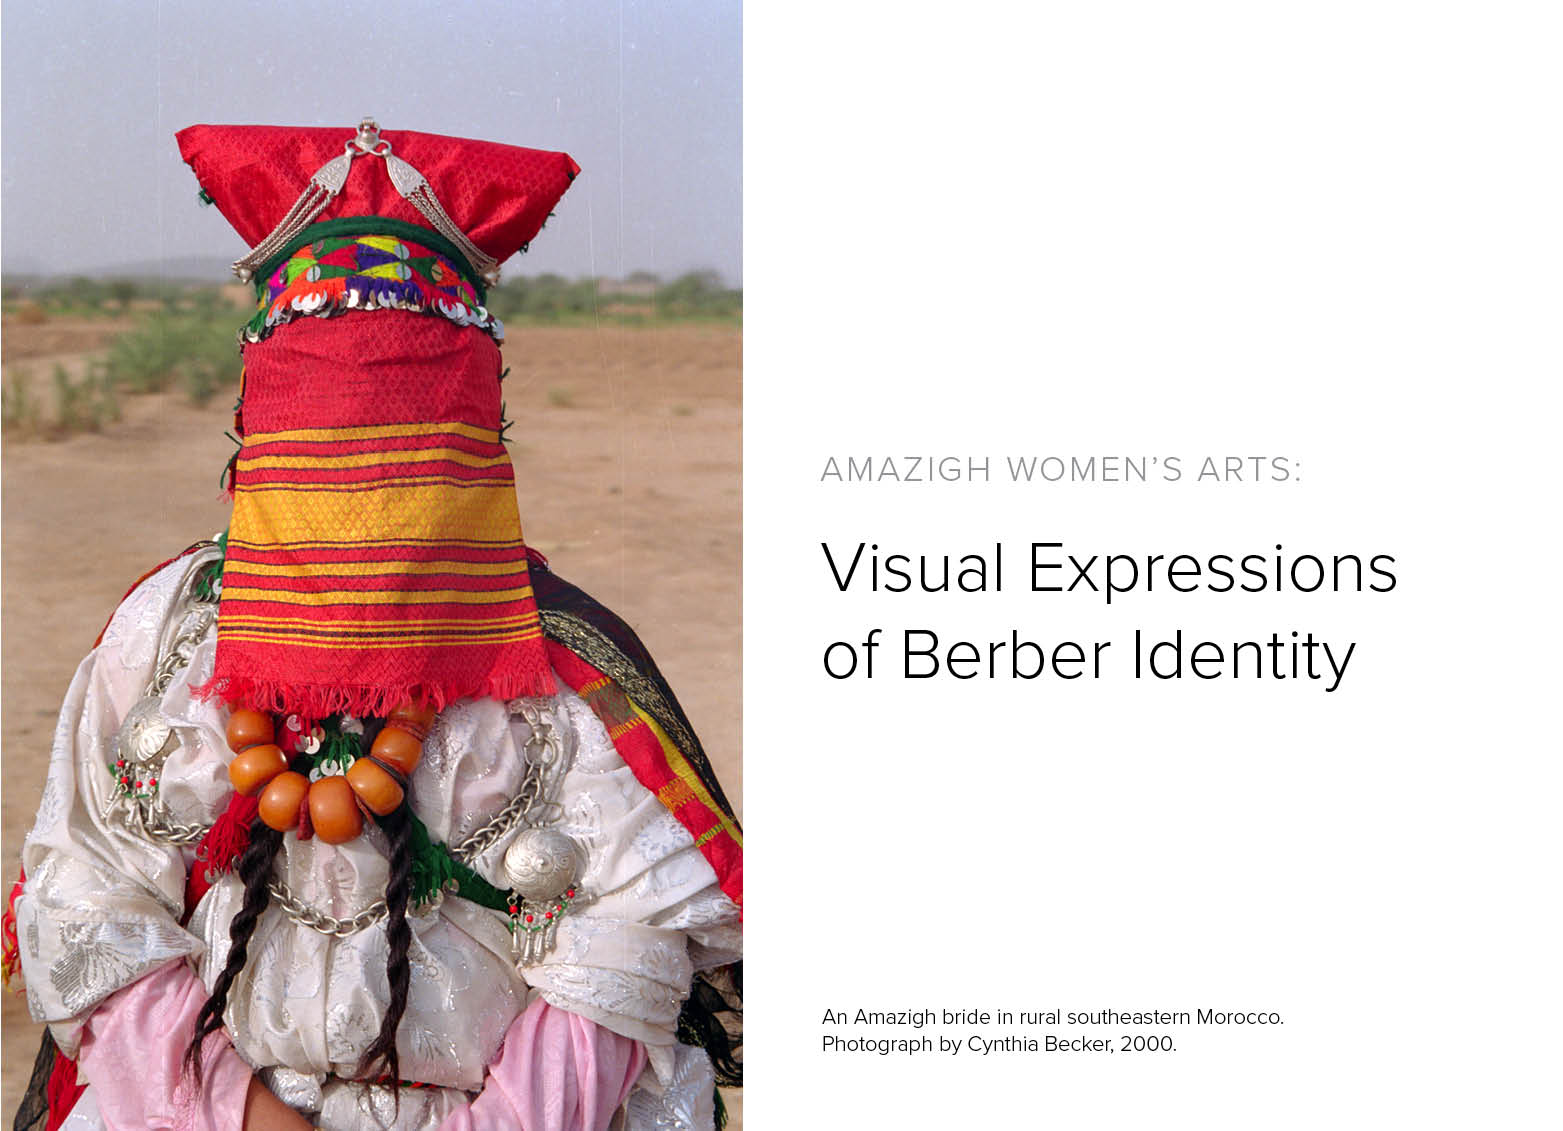 "Amazigh Women’s Arts: Visual Expressions of Berber Identity" by Cynthia Becker